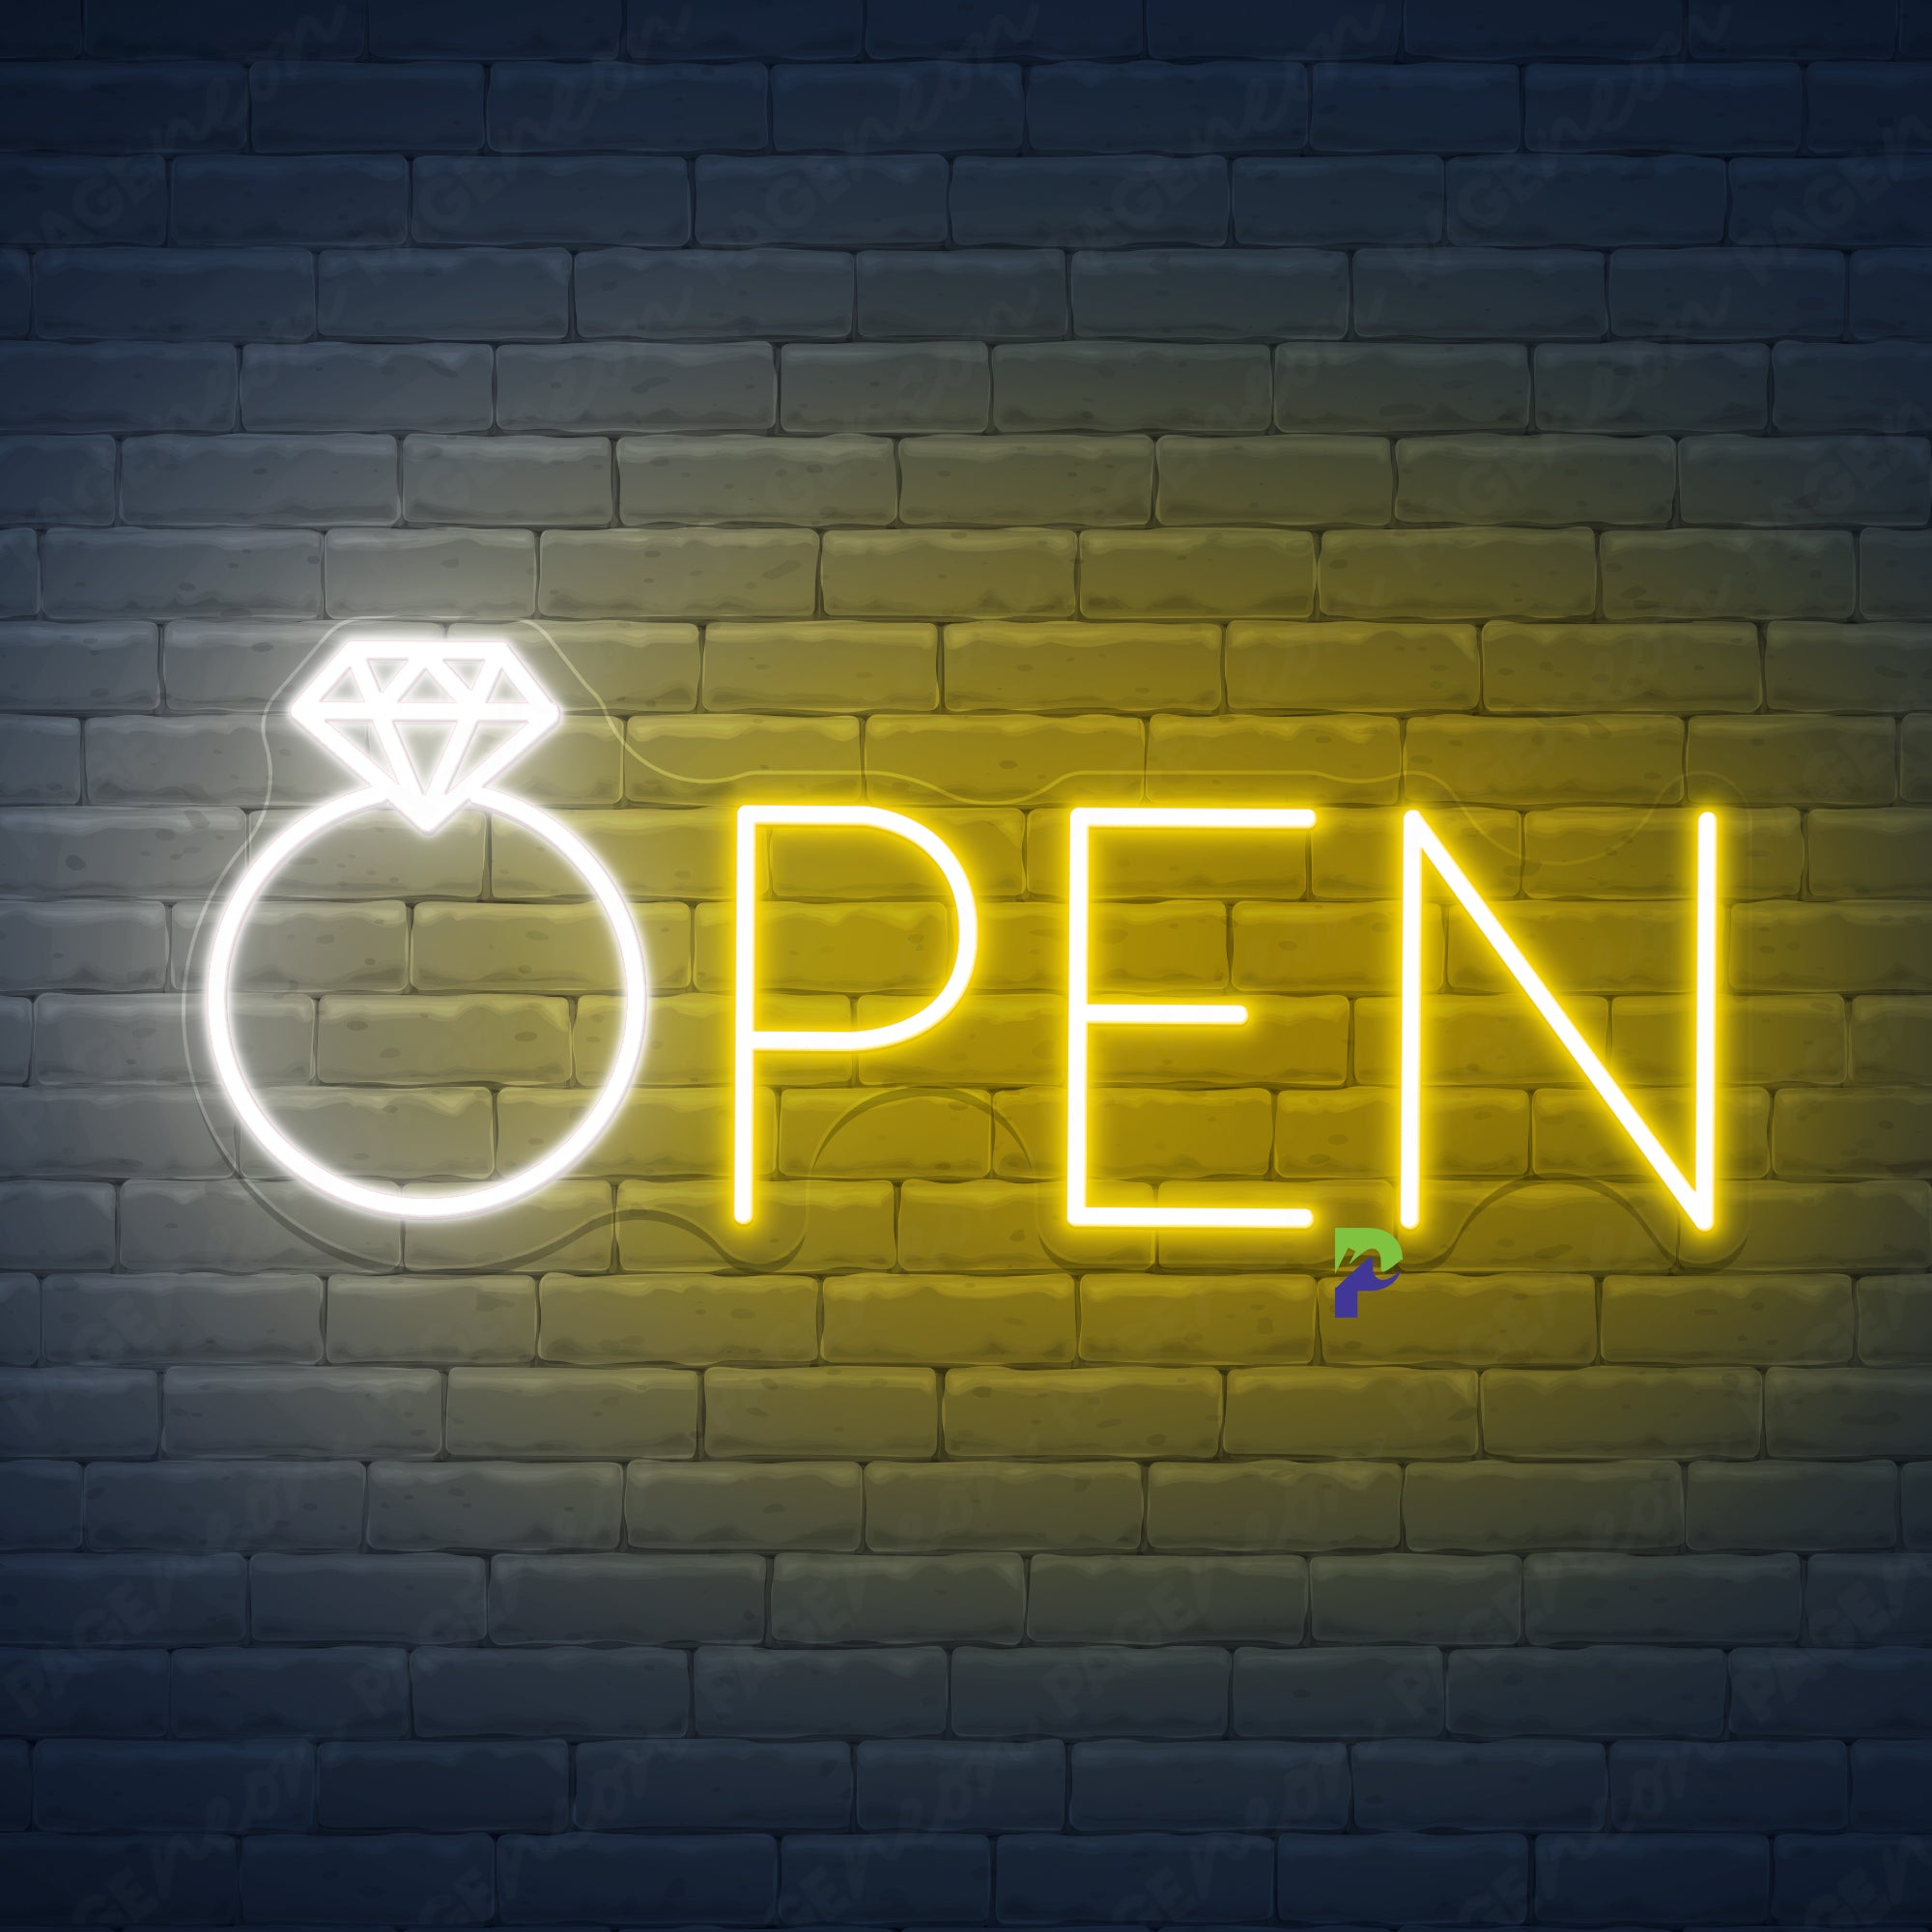 Jewelry Neon Signs Business Open Led Light